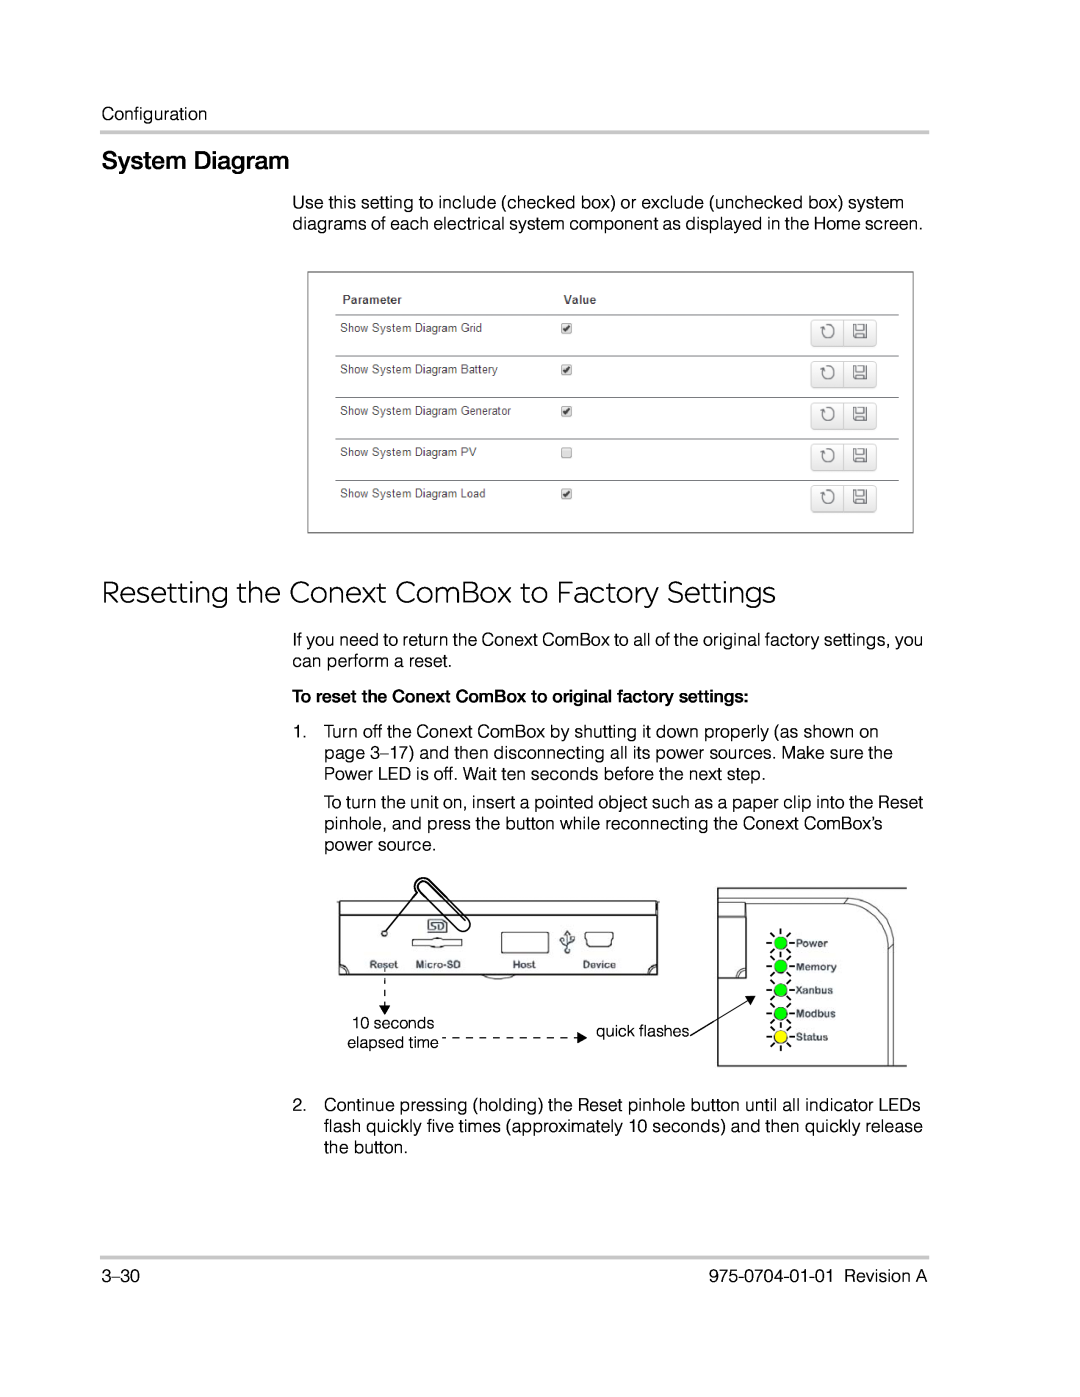 Xantrex Technology Freedom SW Series manual Resetting the Conext ComBox to Factory Settings, System Diagram 